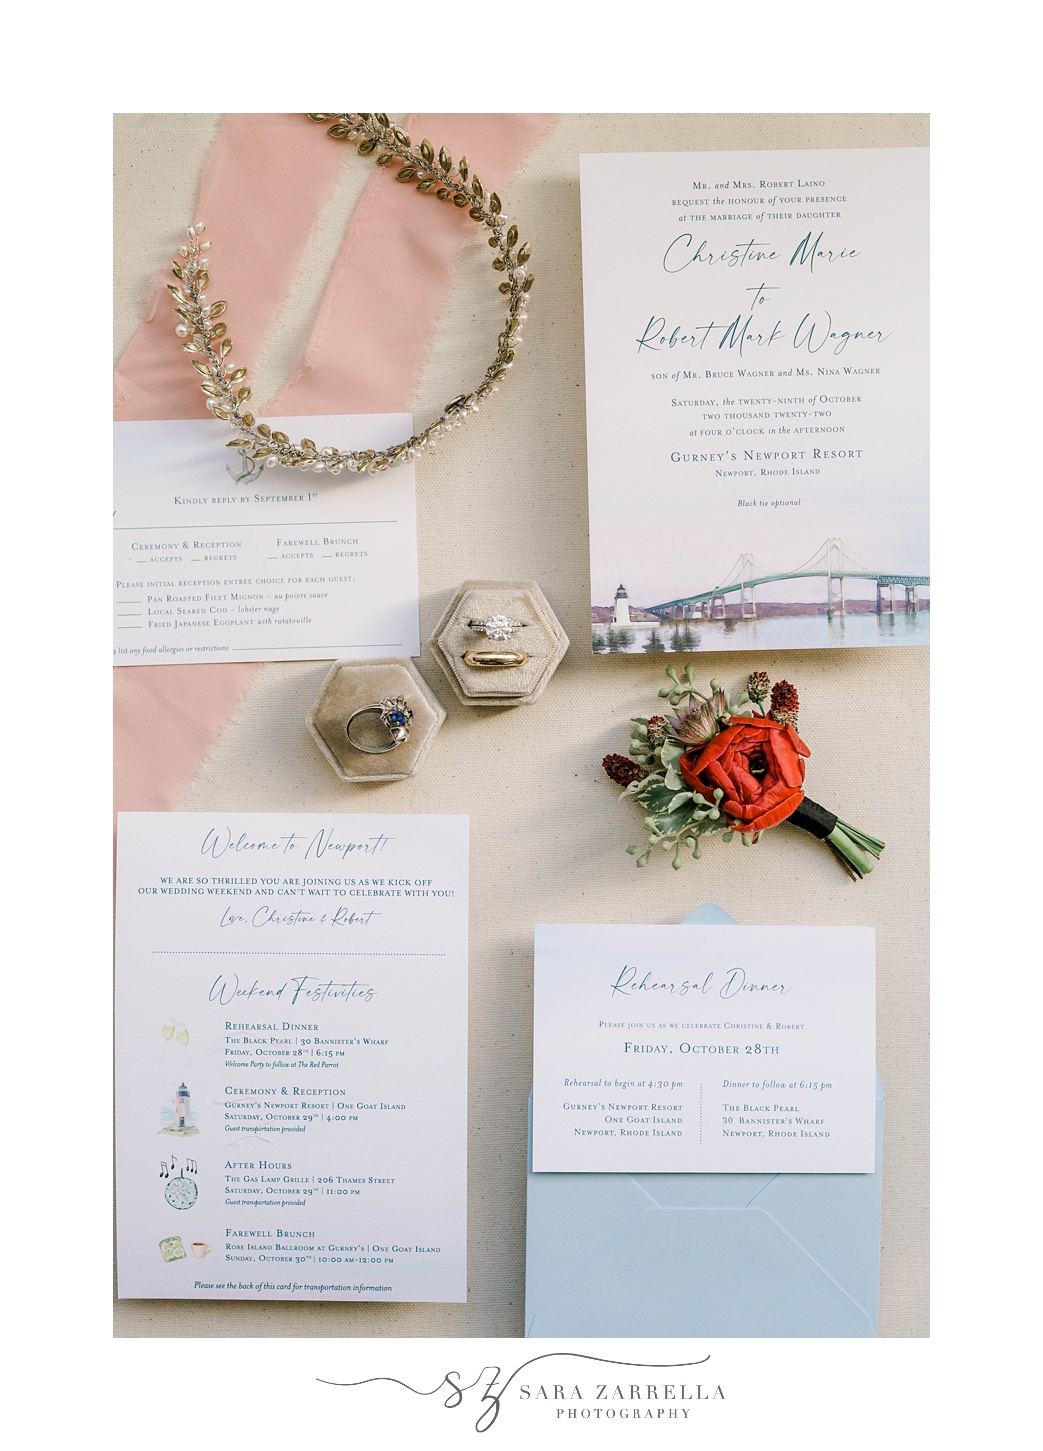 stationery suite for fall wedding at Newport Harbor Island Resort